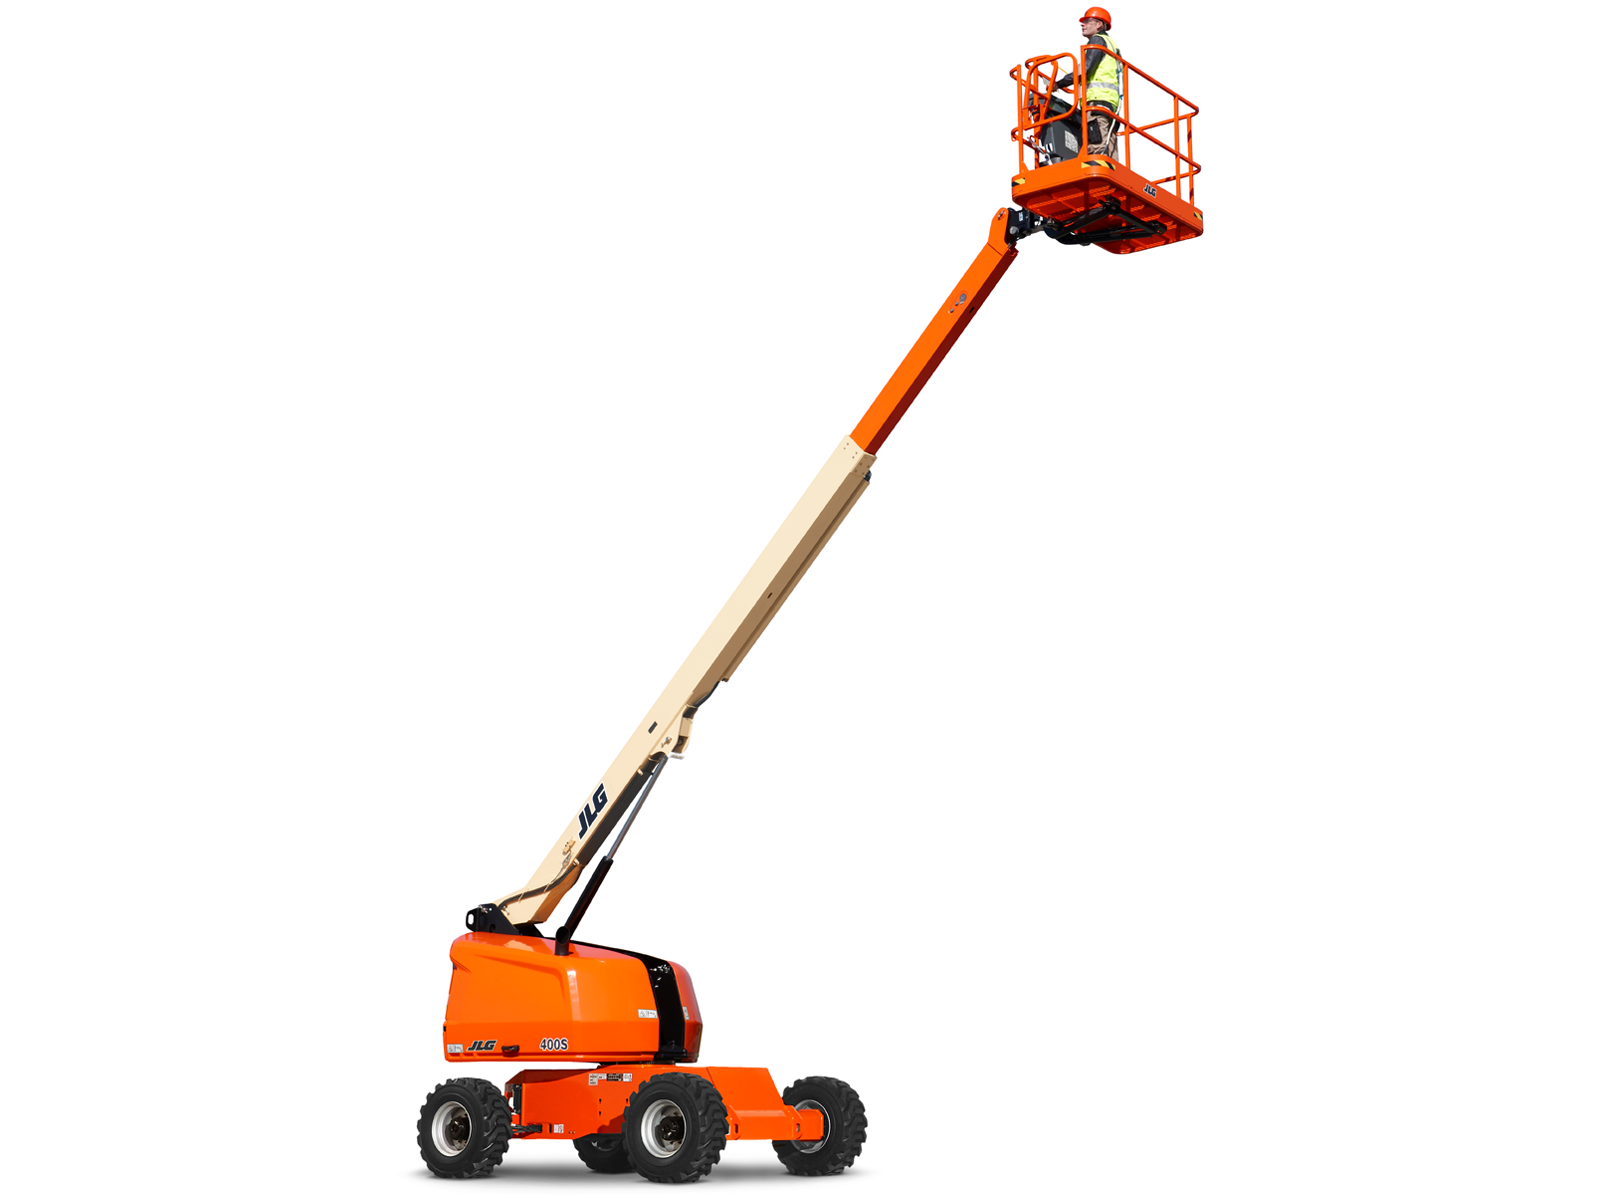 40 foot boom lift for sale